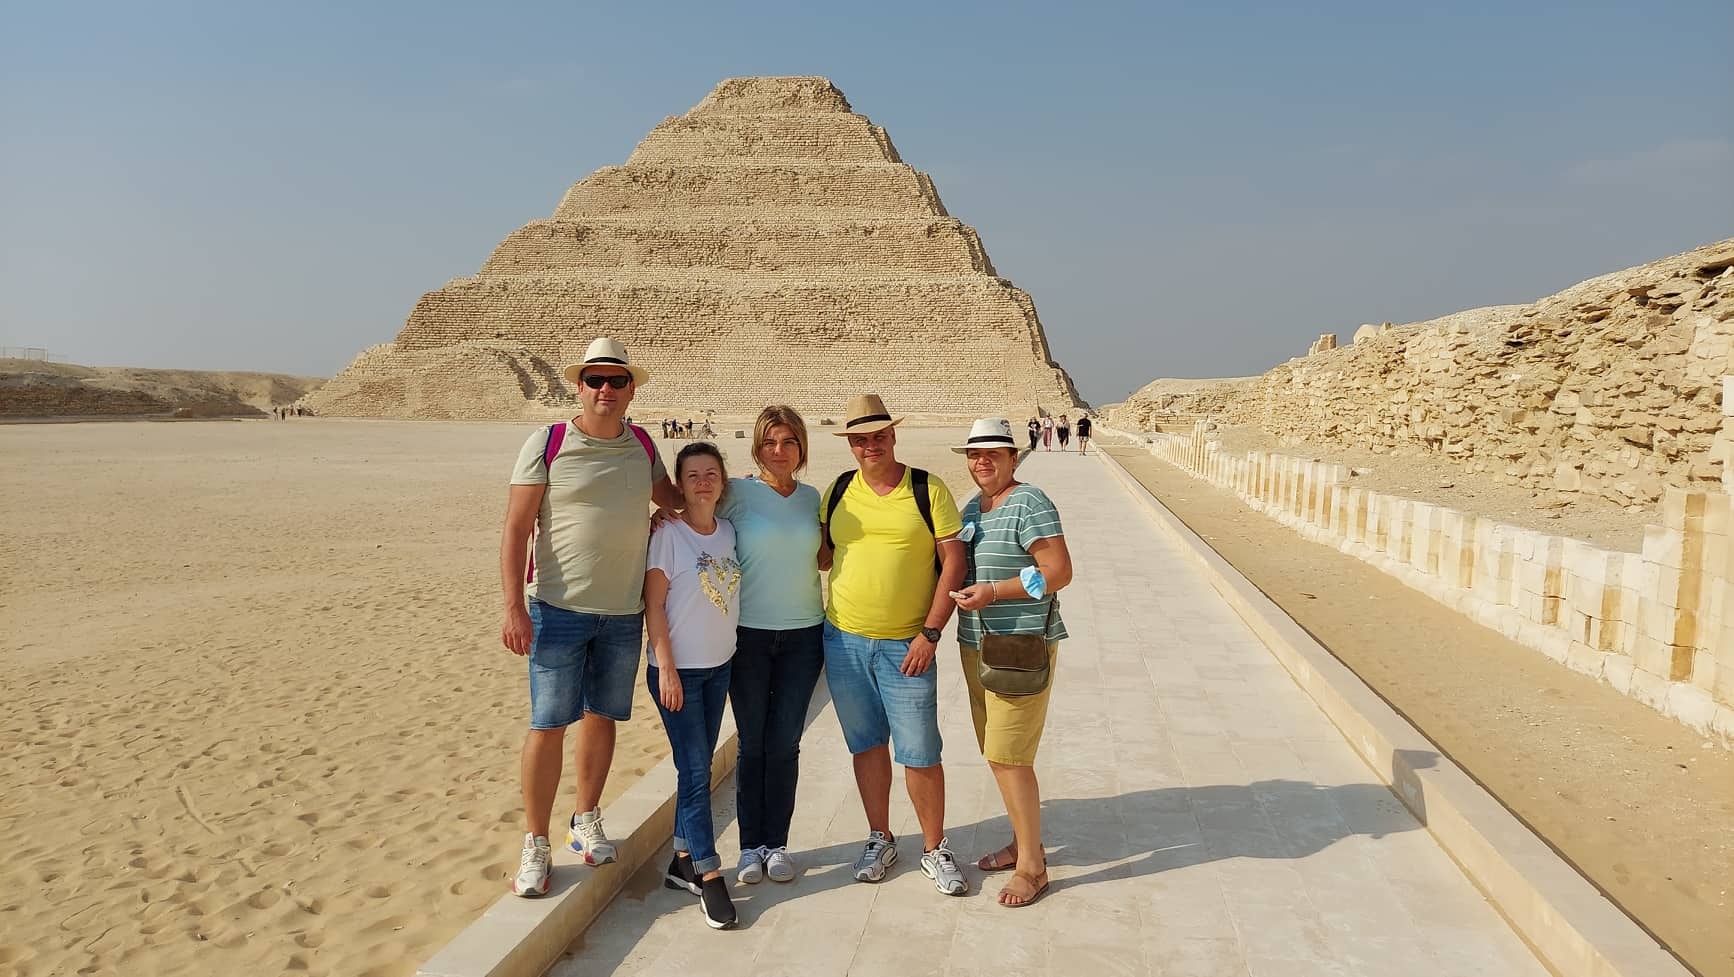 tourhub | Black Camel Tours | Cairo: Private Tour 4 Days Package to Cairo, Giza with Hotel & Transport | 1